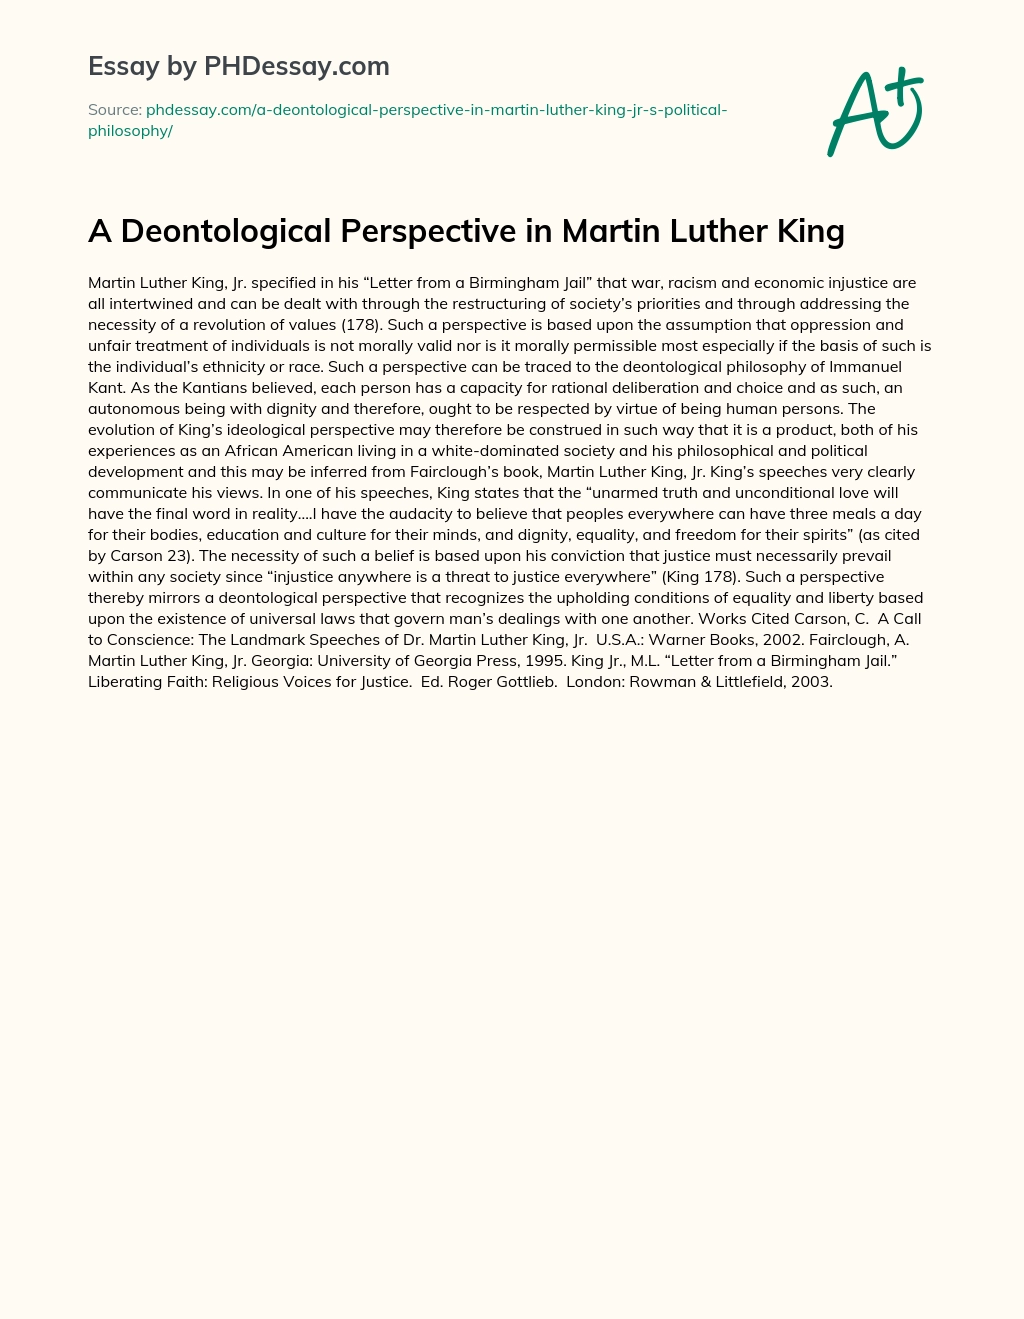 A Deontological Perspective in Martin Luther King essay